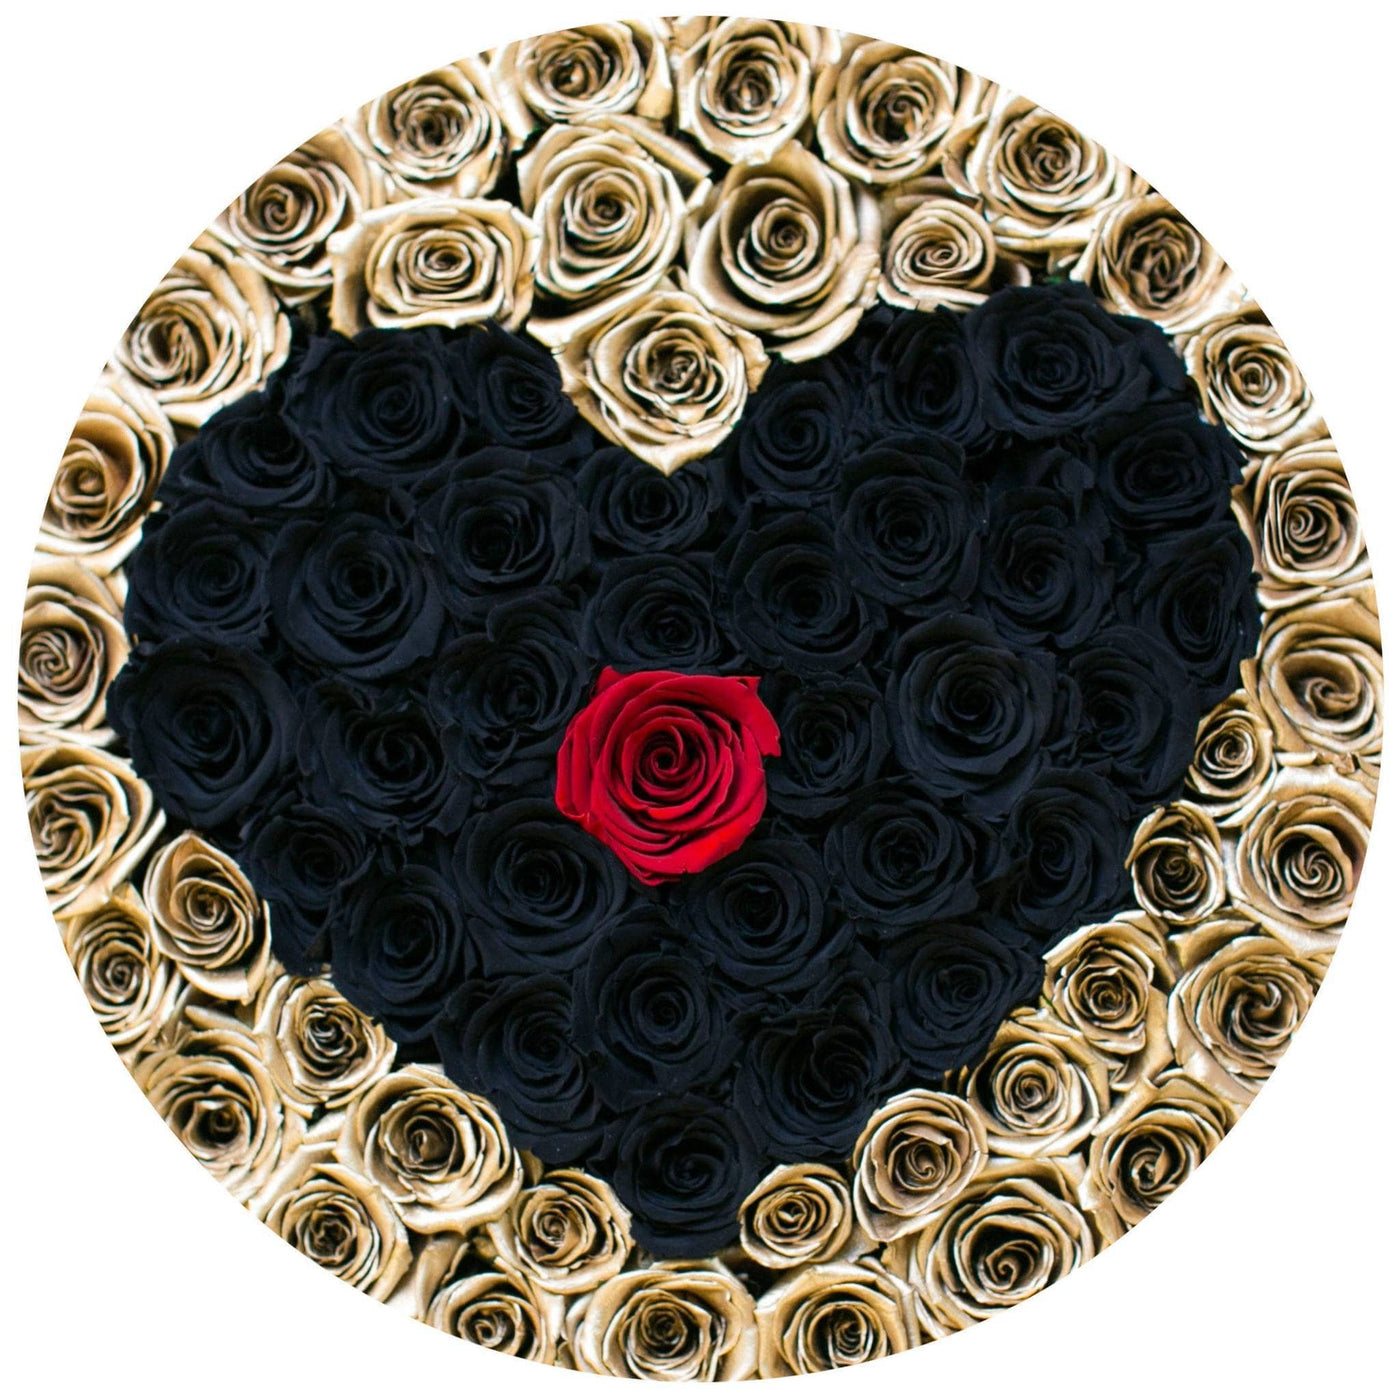 Roses That Last A Year - 24k Gold & Black